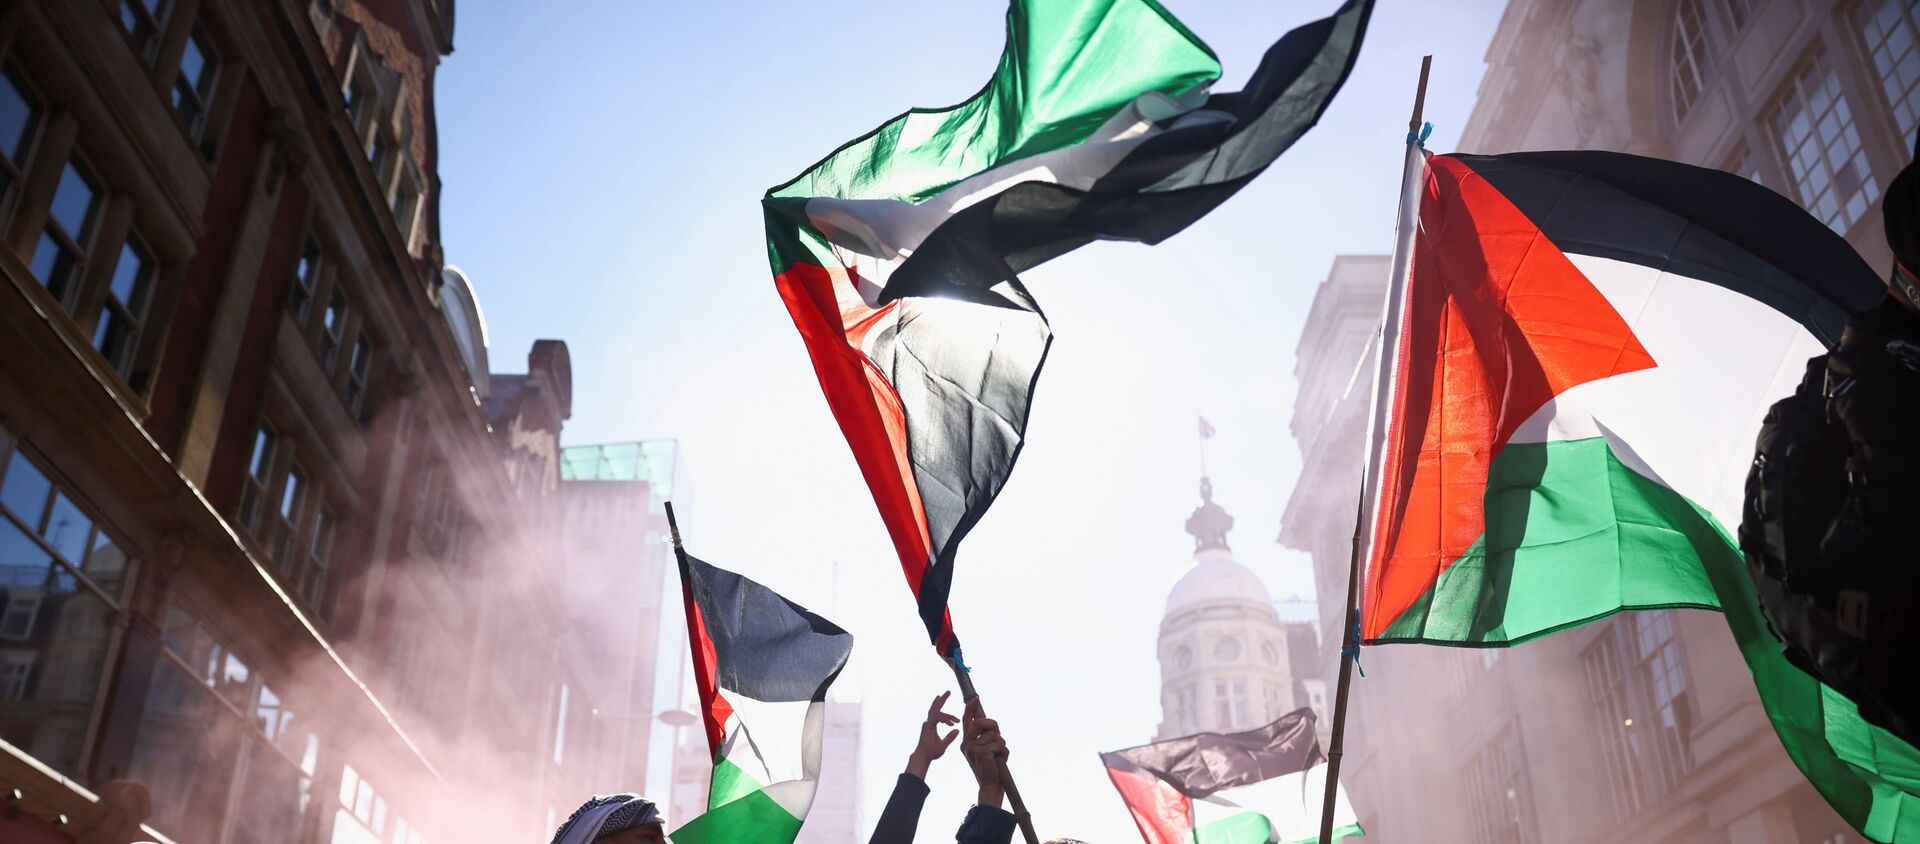 Pro-Palestinian demonstrators hold Palestinian flags, as they attend a protest following a flare-up of Israeli-Palestinian violence, in London, Britain, May 15, 2021. - Sputnik International, 1920, 17.05.2021